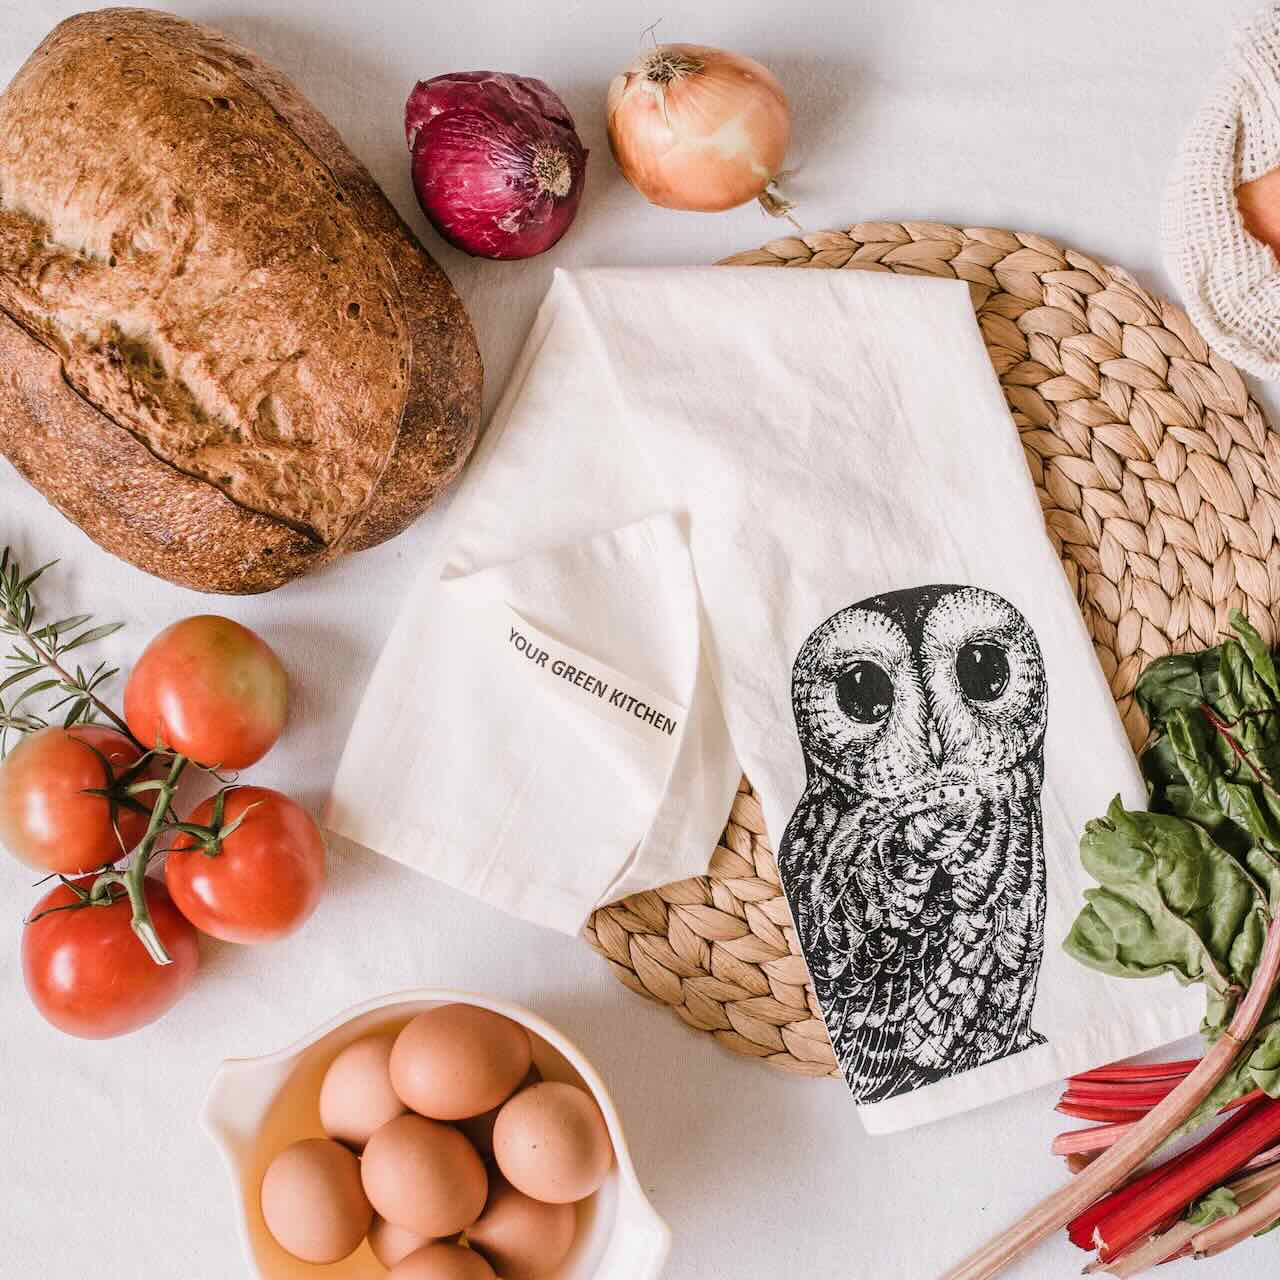 A white kitchen tea towel with a large owl printed, laying casually on a white table top, surrounded by bread, red tomatoes on vine, eggs and onions.